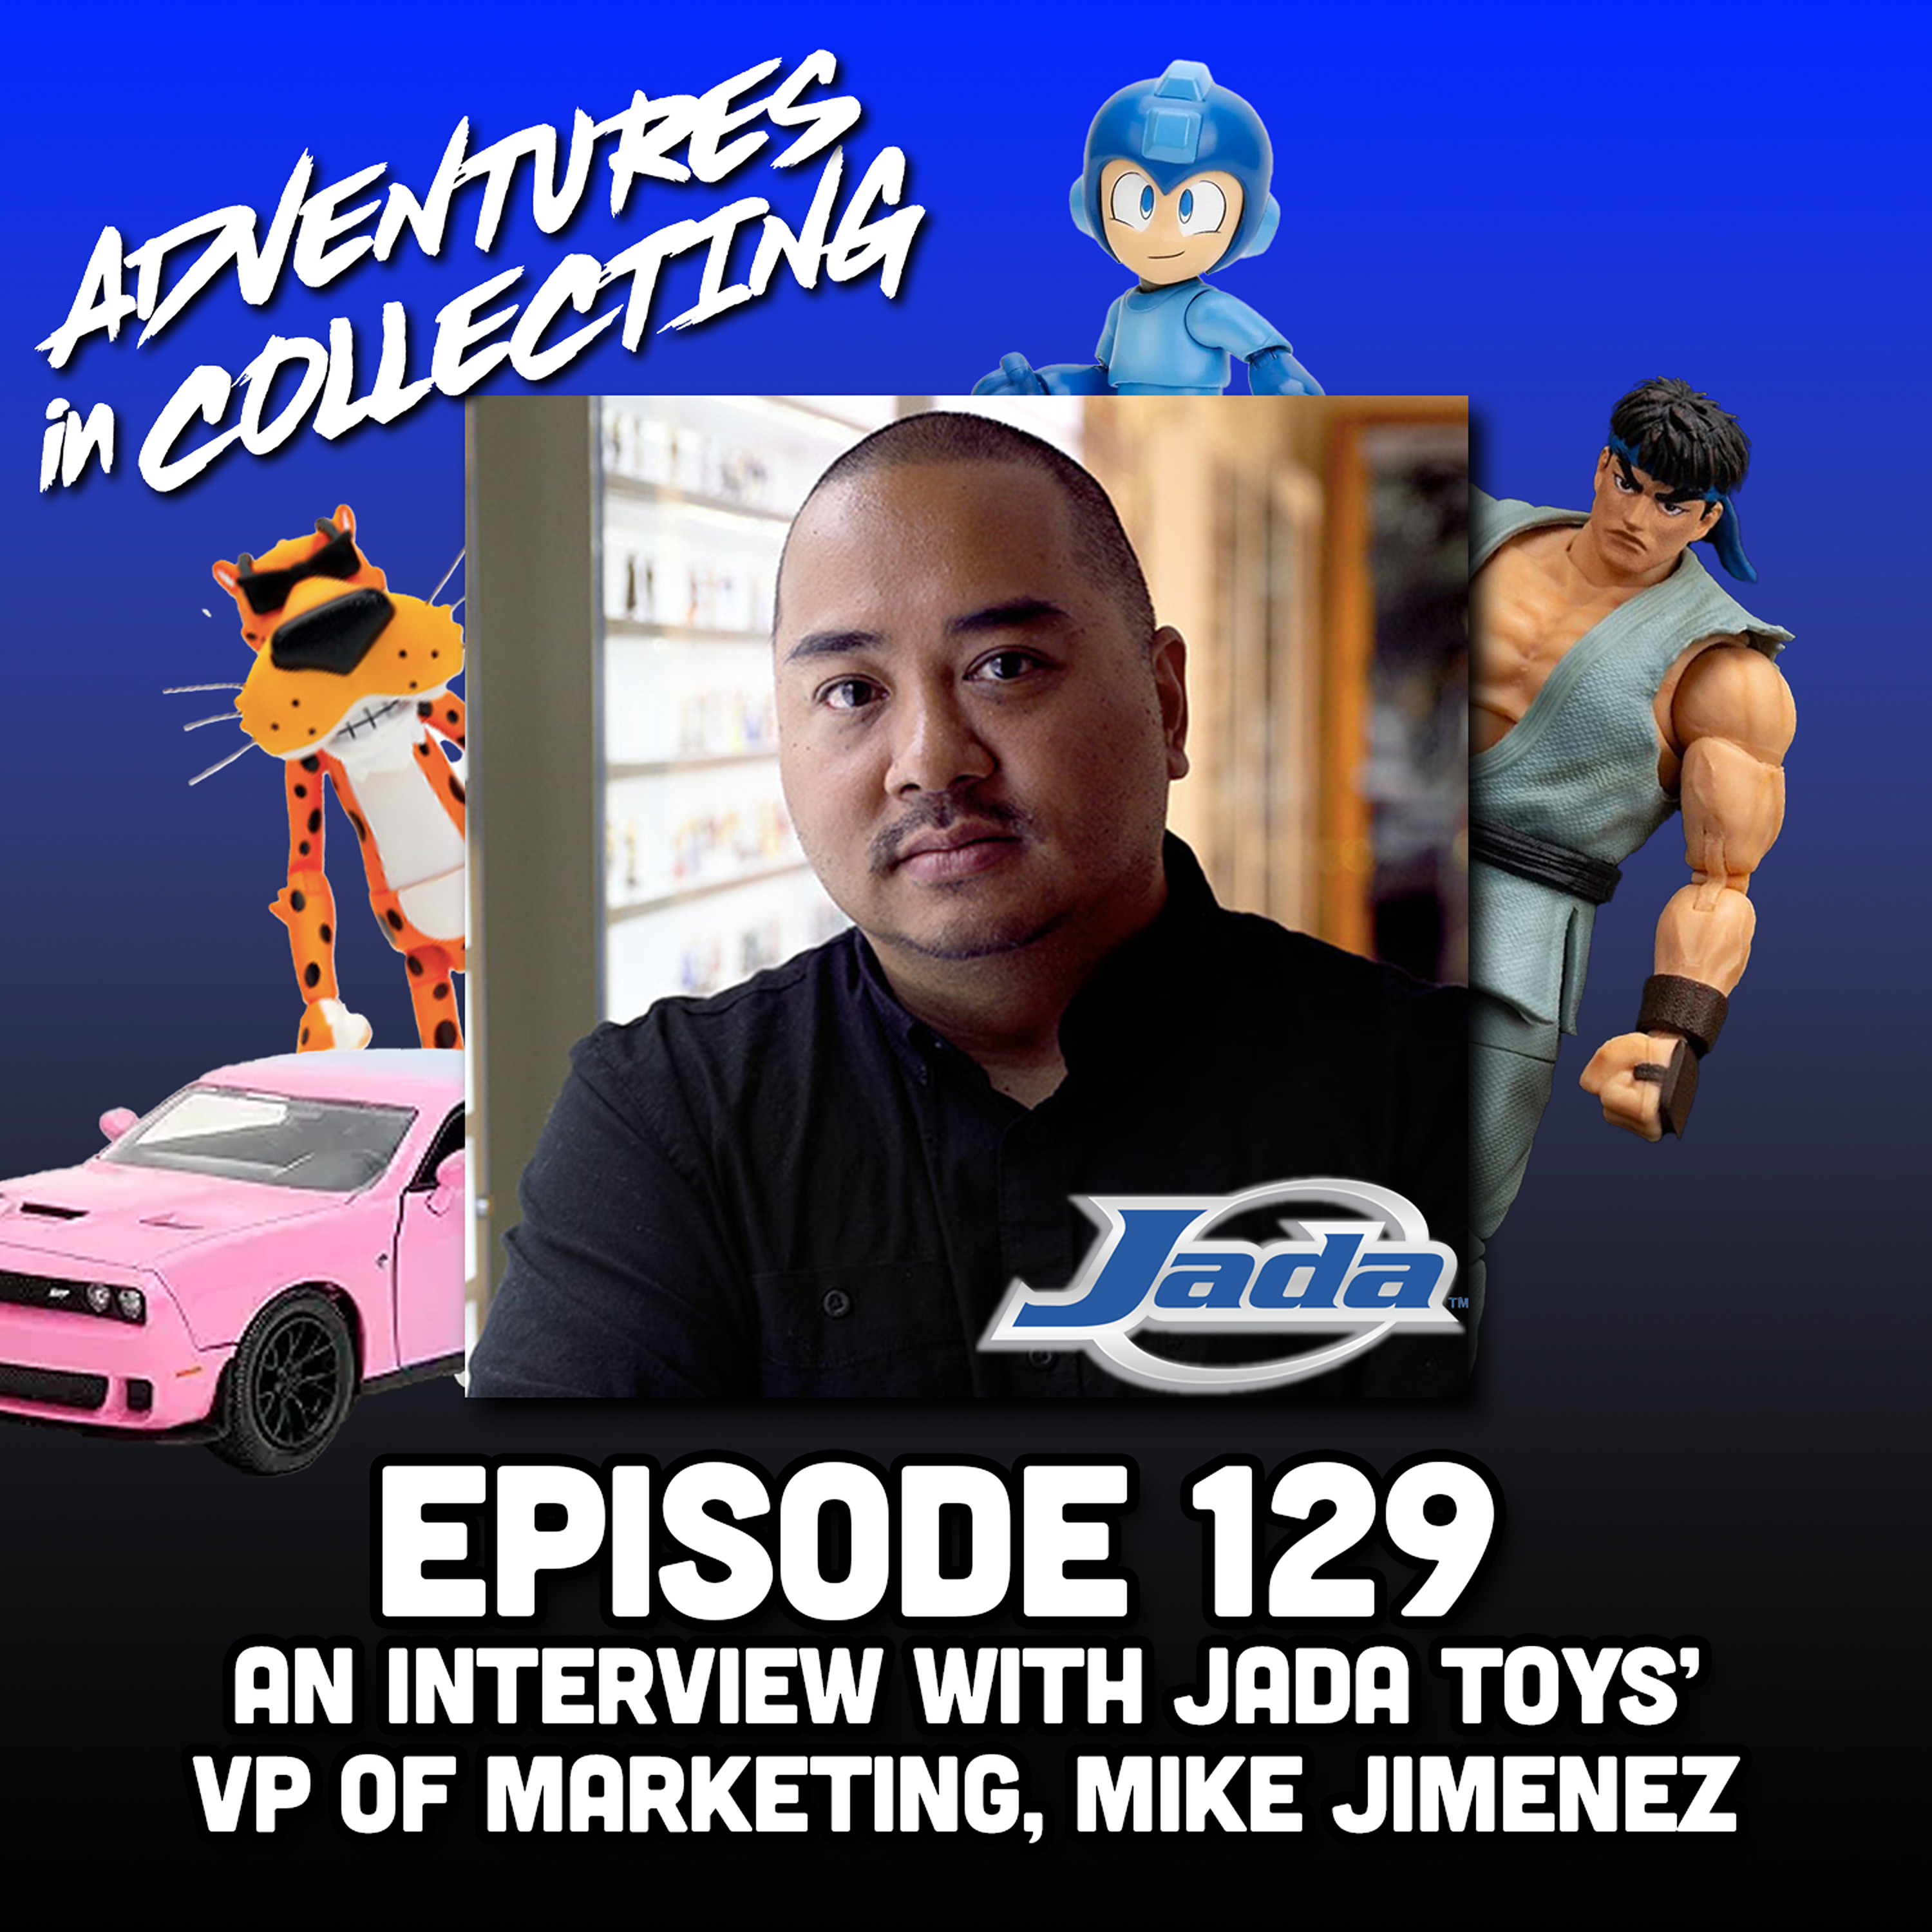 An Interview with Jada Toys' VP of Marketing, Mike Jimenez